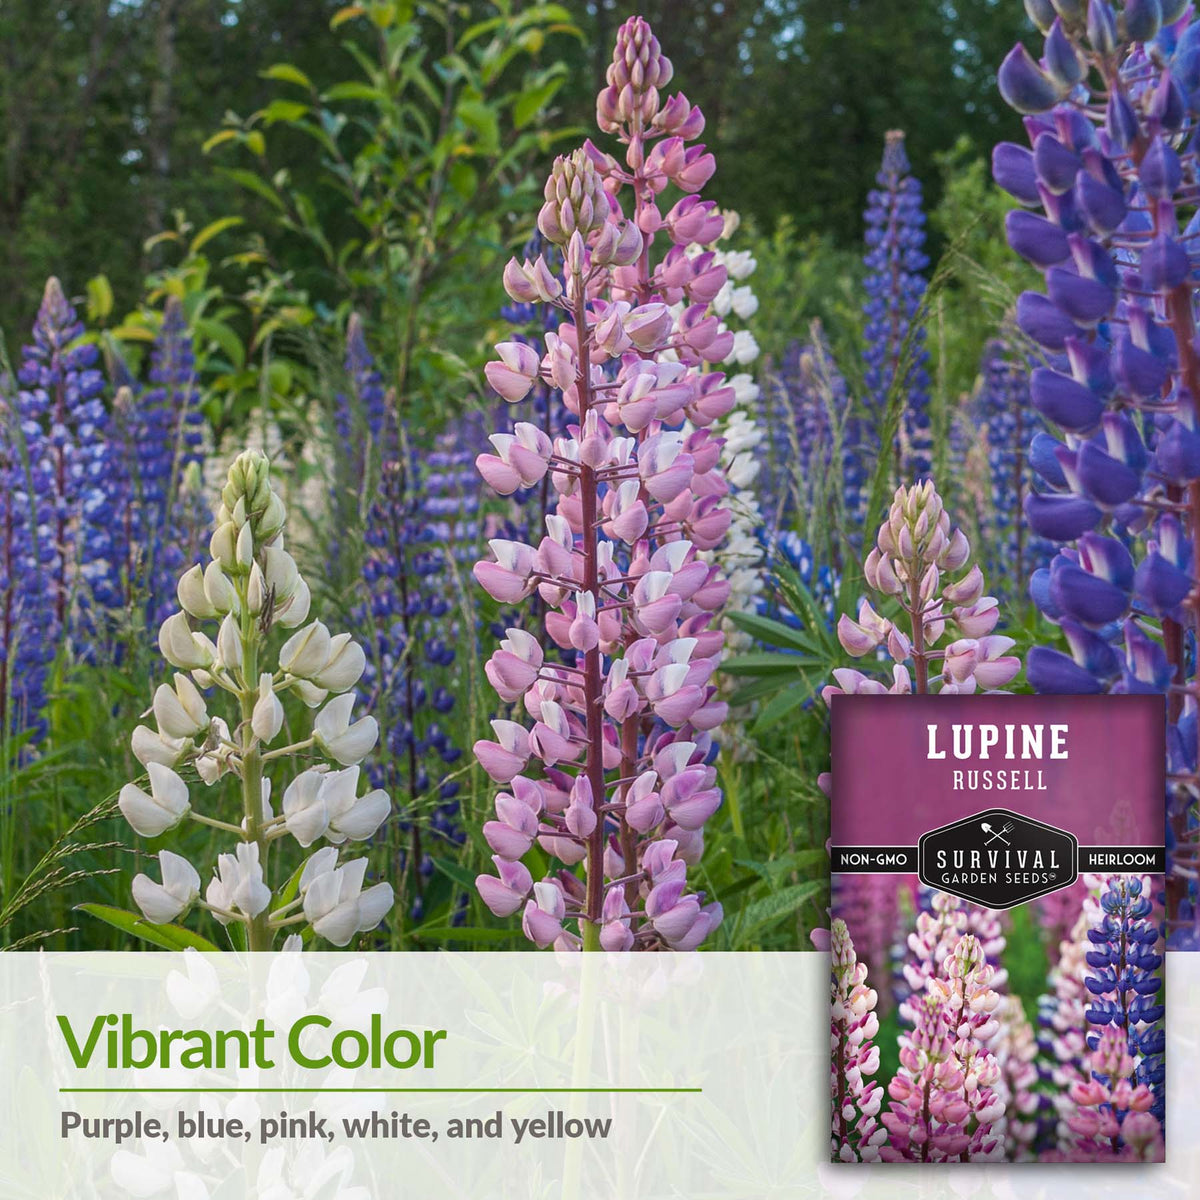 Russell Lupine flowers have vibrant colors